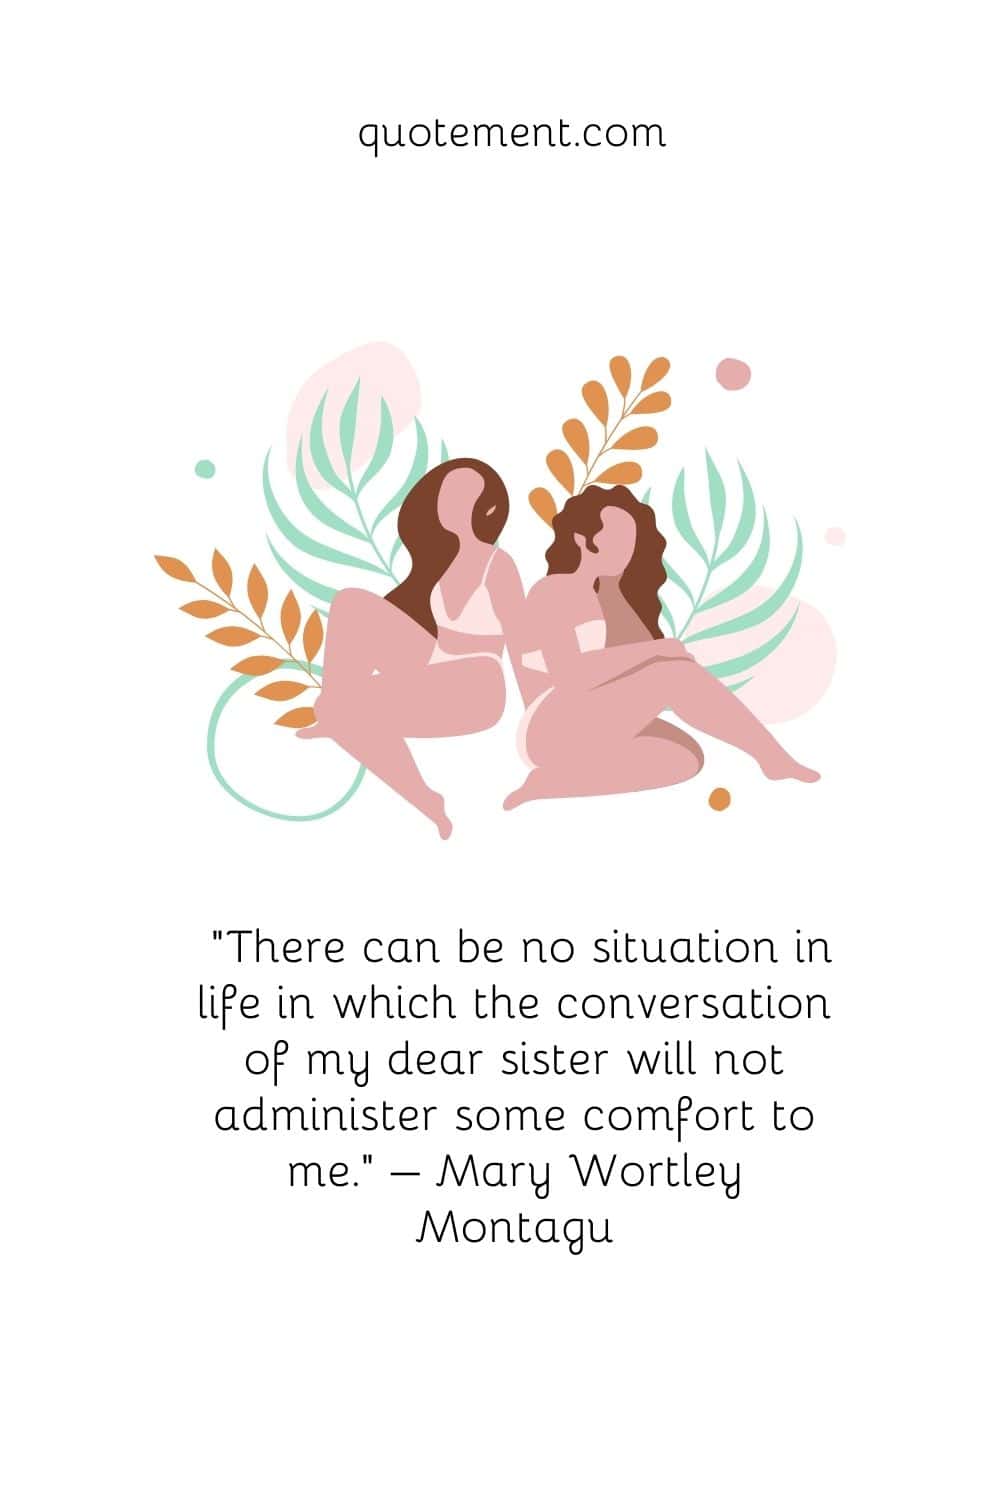 “There can be no situation in life in which the conversation of my dear sister will not administer some comfort to me.” – Mary Wortley Montagu